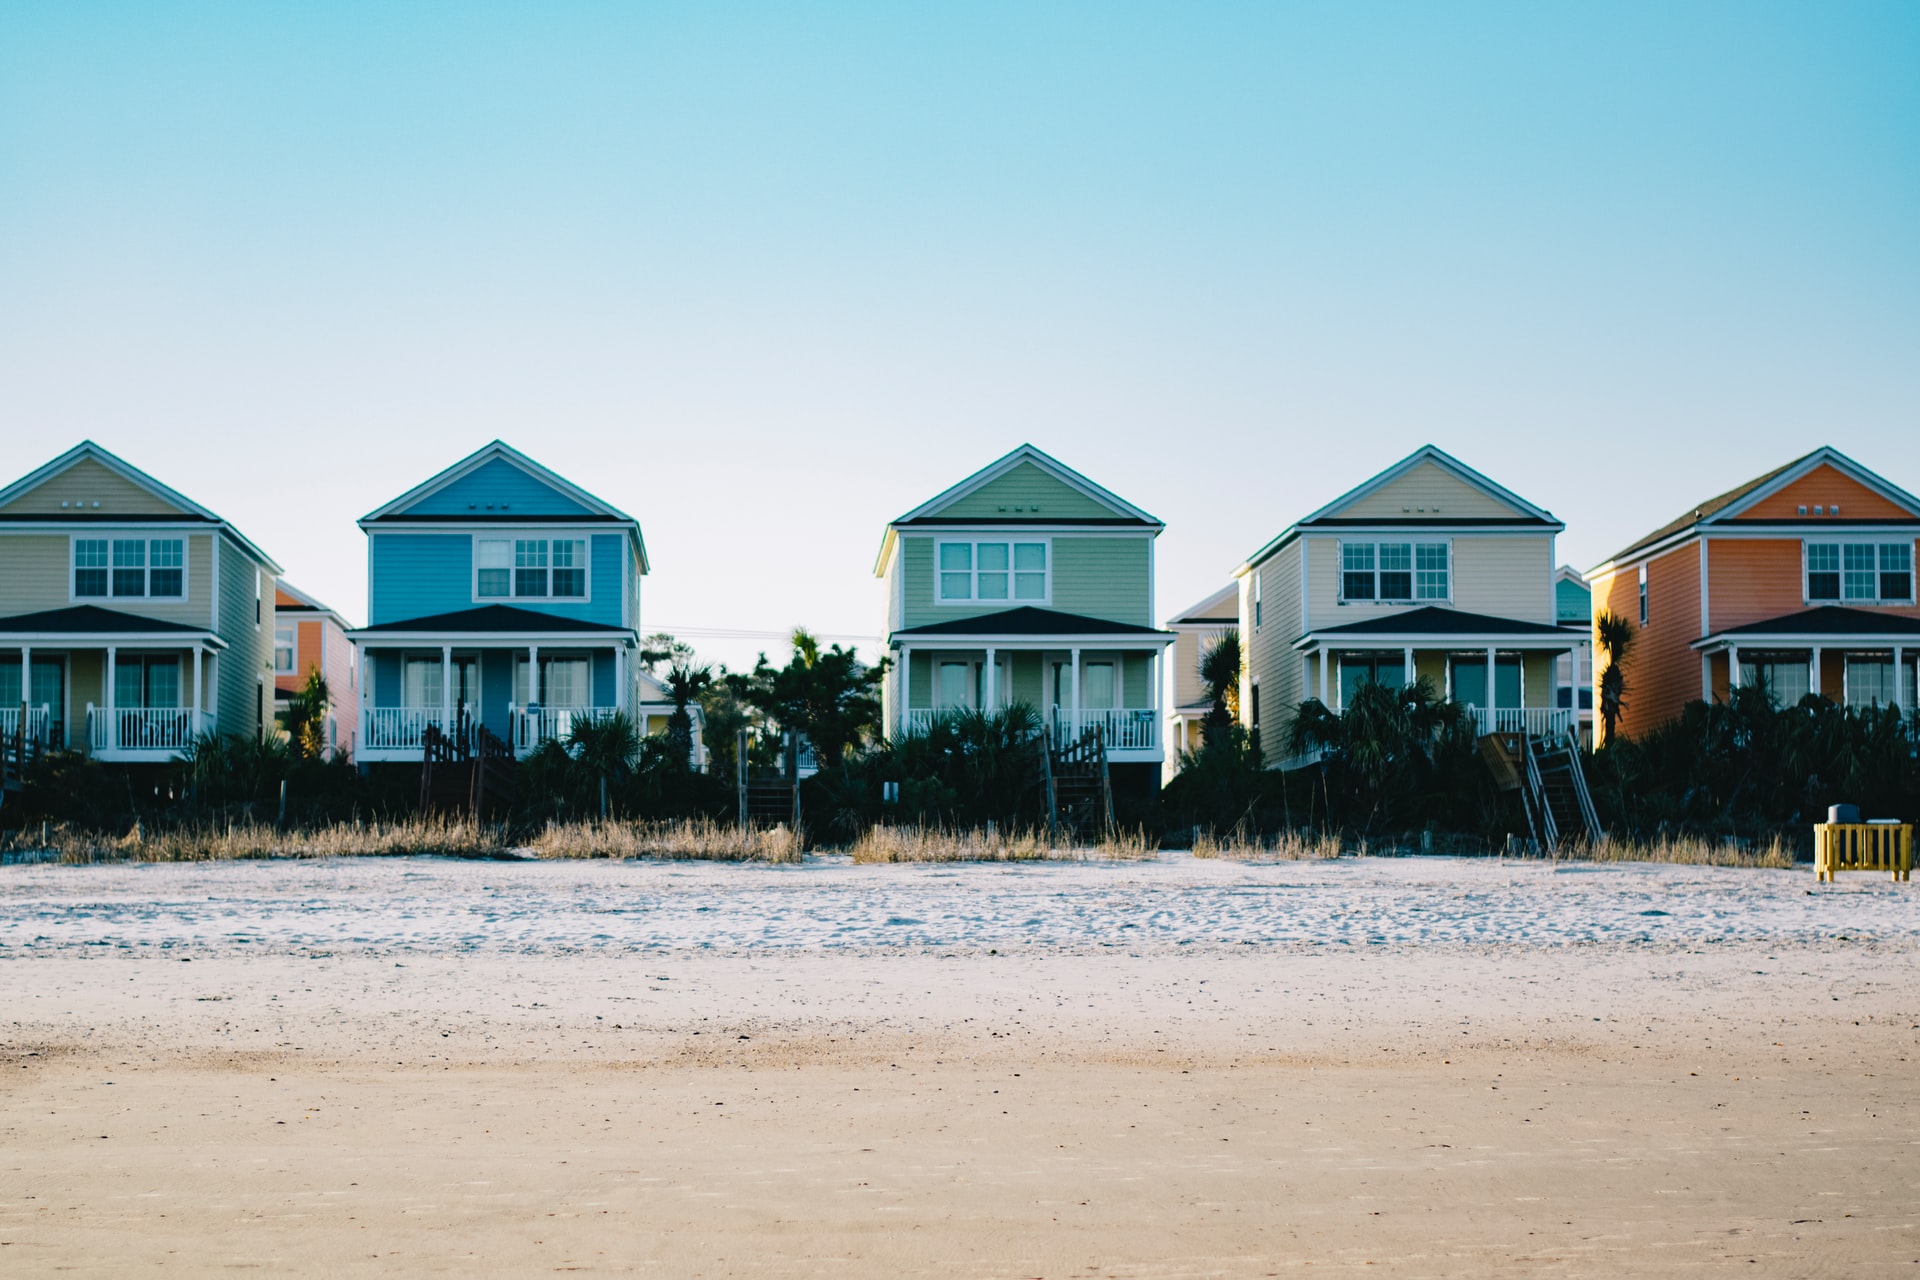 A row of houses on a beach representing snowbird properties in the U.S.